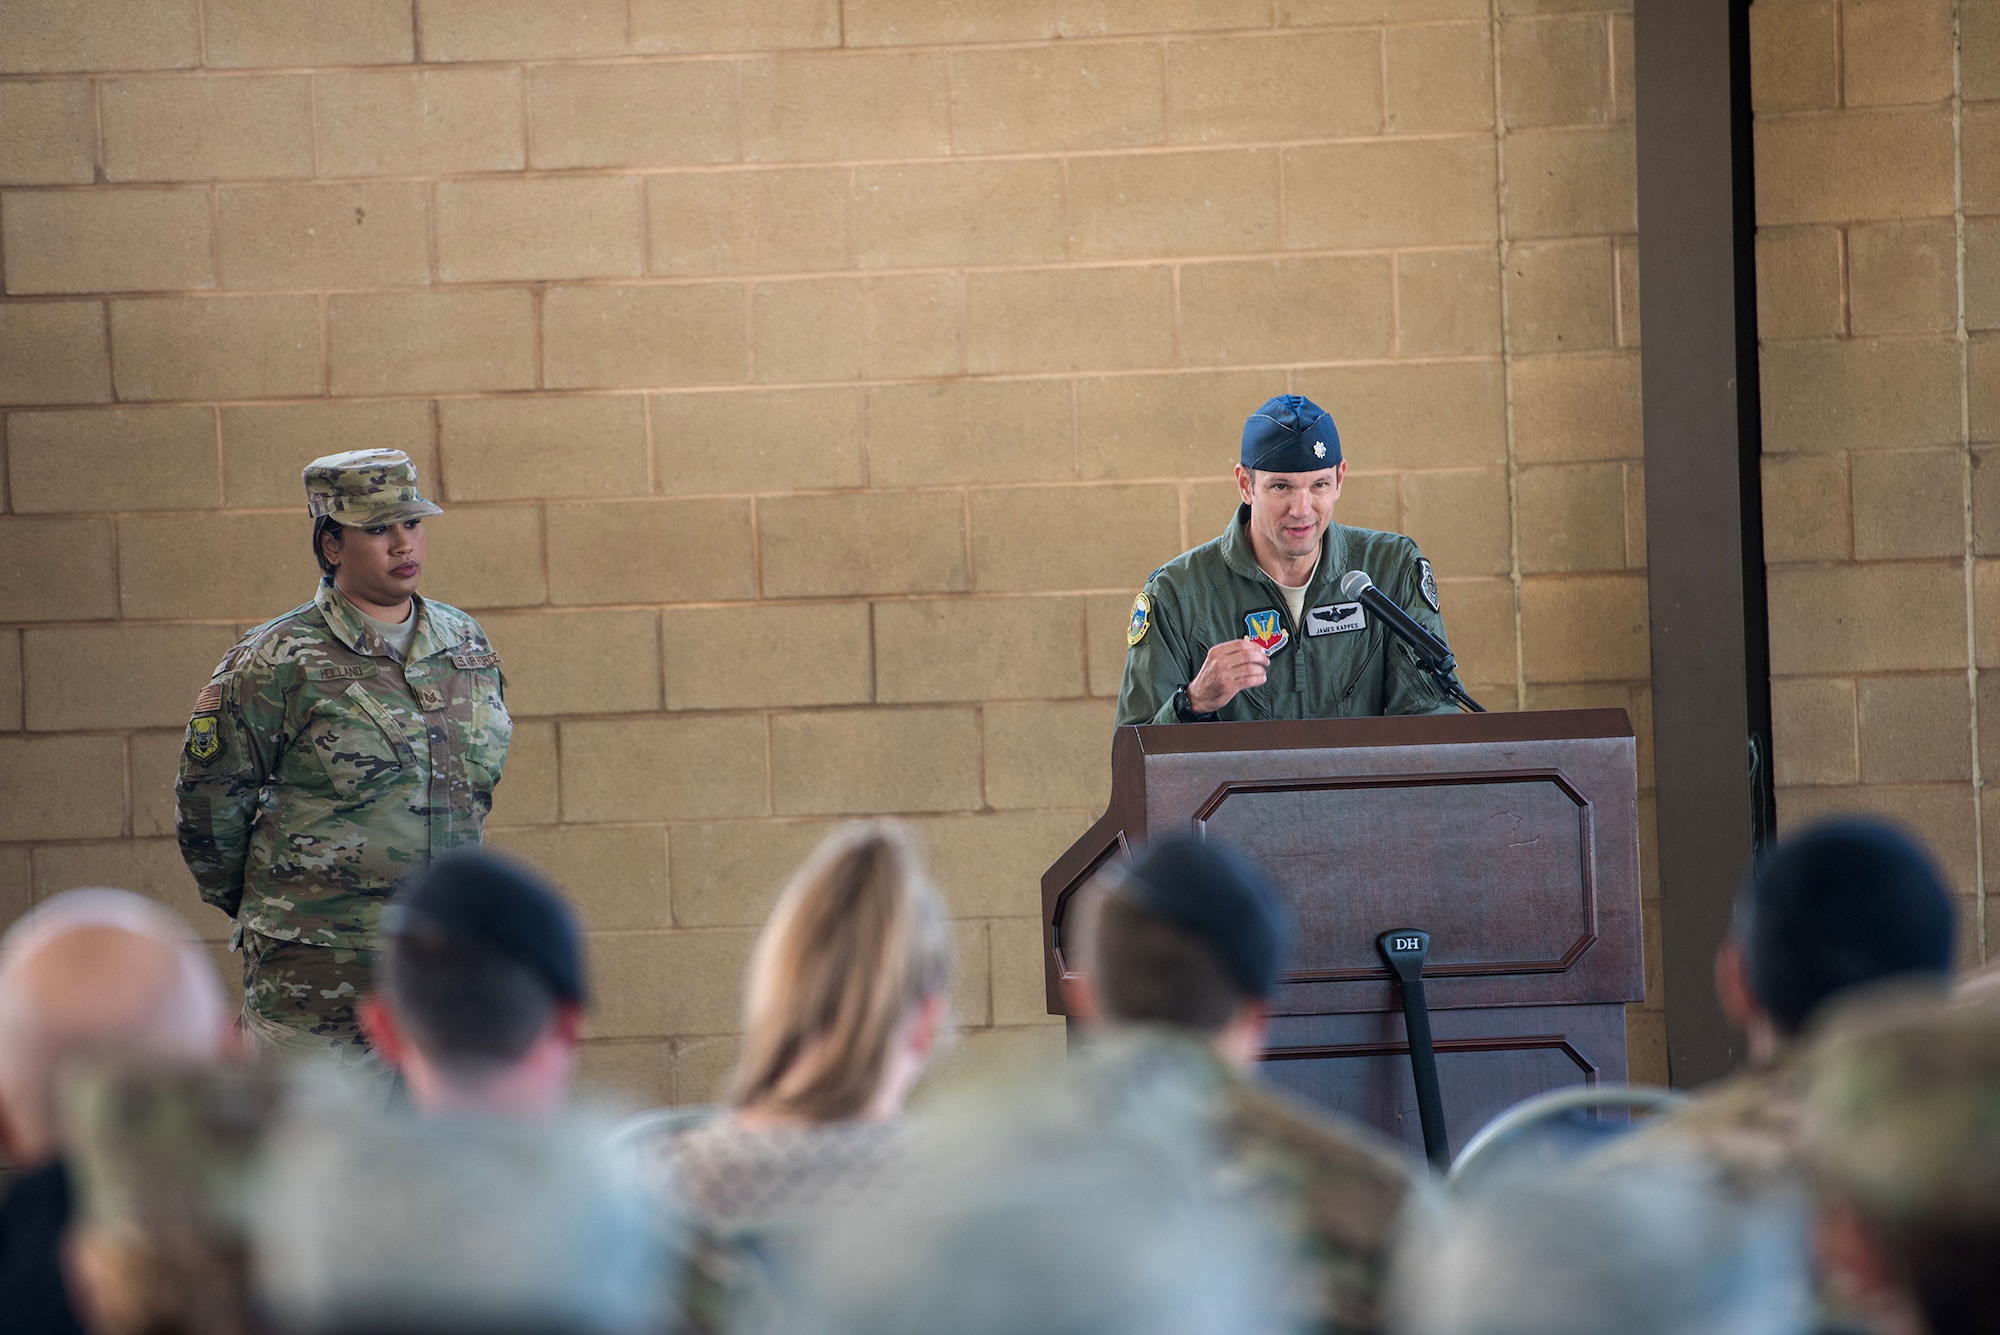 U.S. Air Force Lt. Col. James Kappes, 6th Combat Training Squadron operations officer, Camp Bullis, presents opening remarks during the activation and assumption of command ceremony of Detachment 2, Combat Training Squadron, Sept. 17, 2019, at Joint Base San Antonio-Medina Annex, Texas.